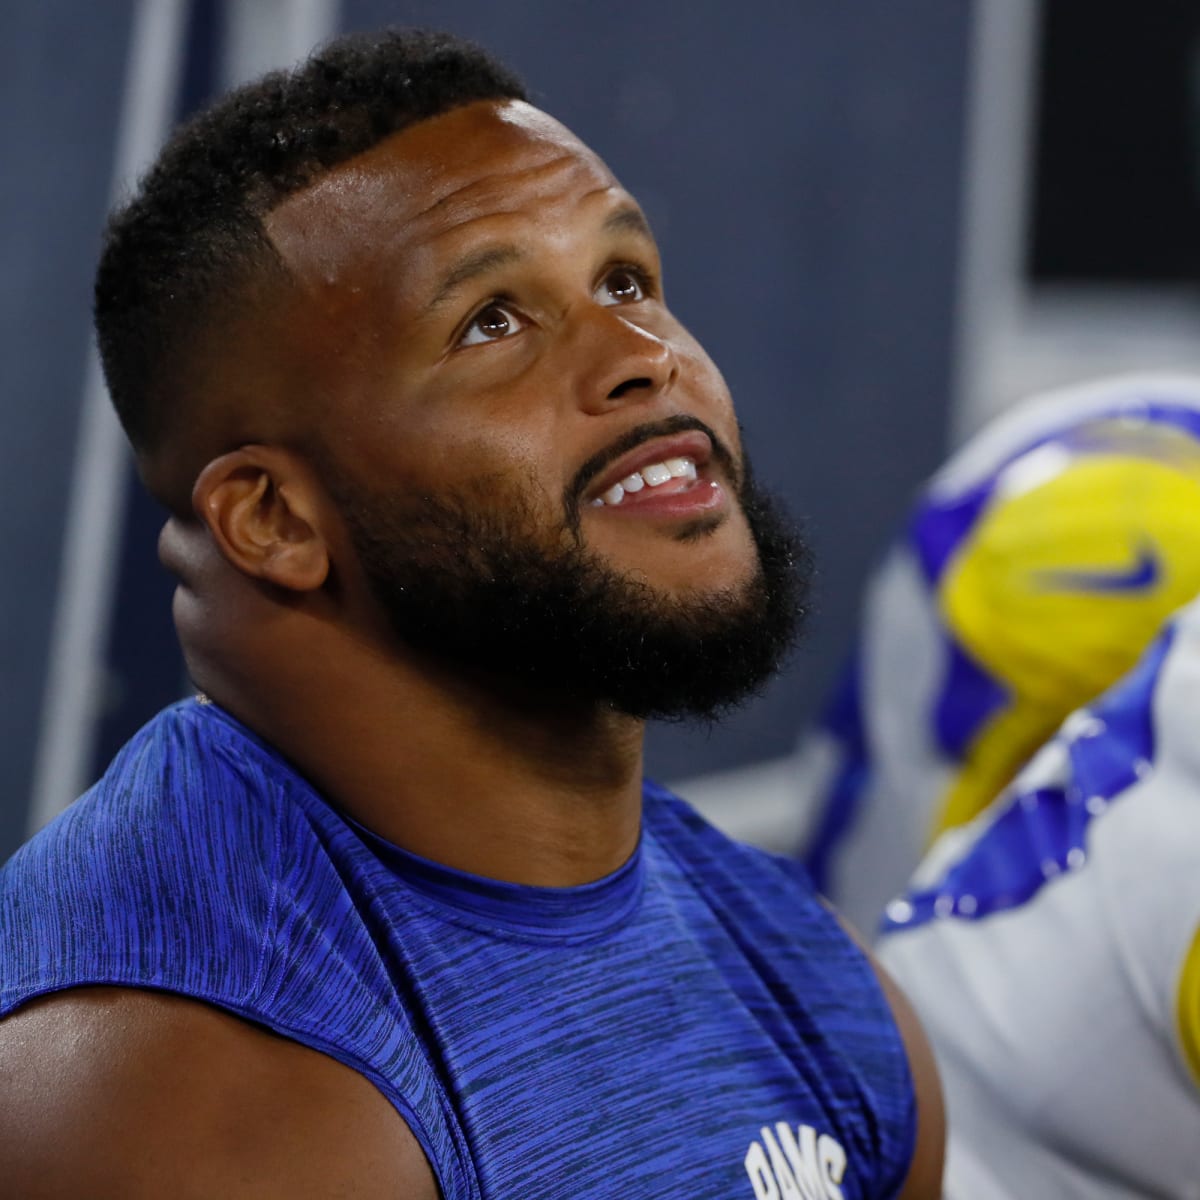 NFL Rumors on X: #Rams Aaron Donald had a jersey swap with The